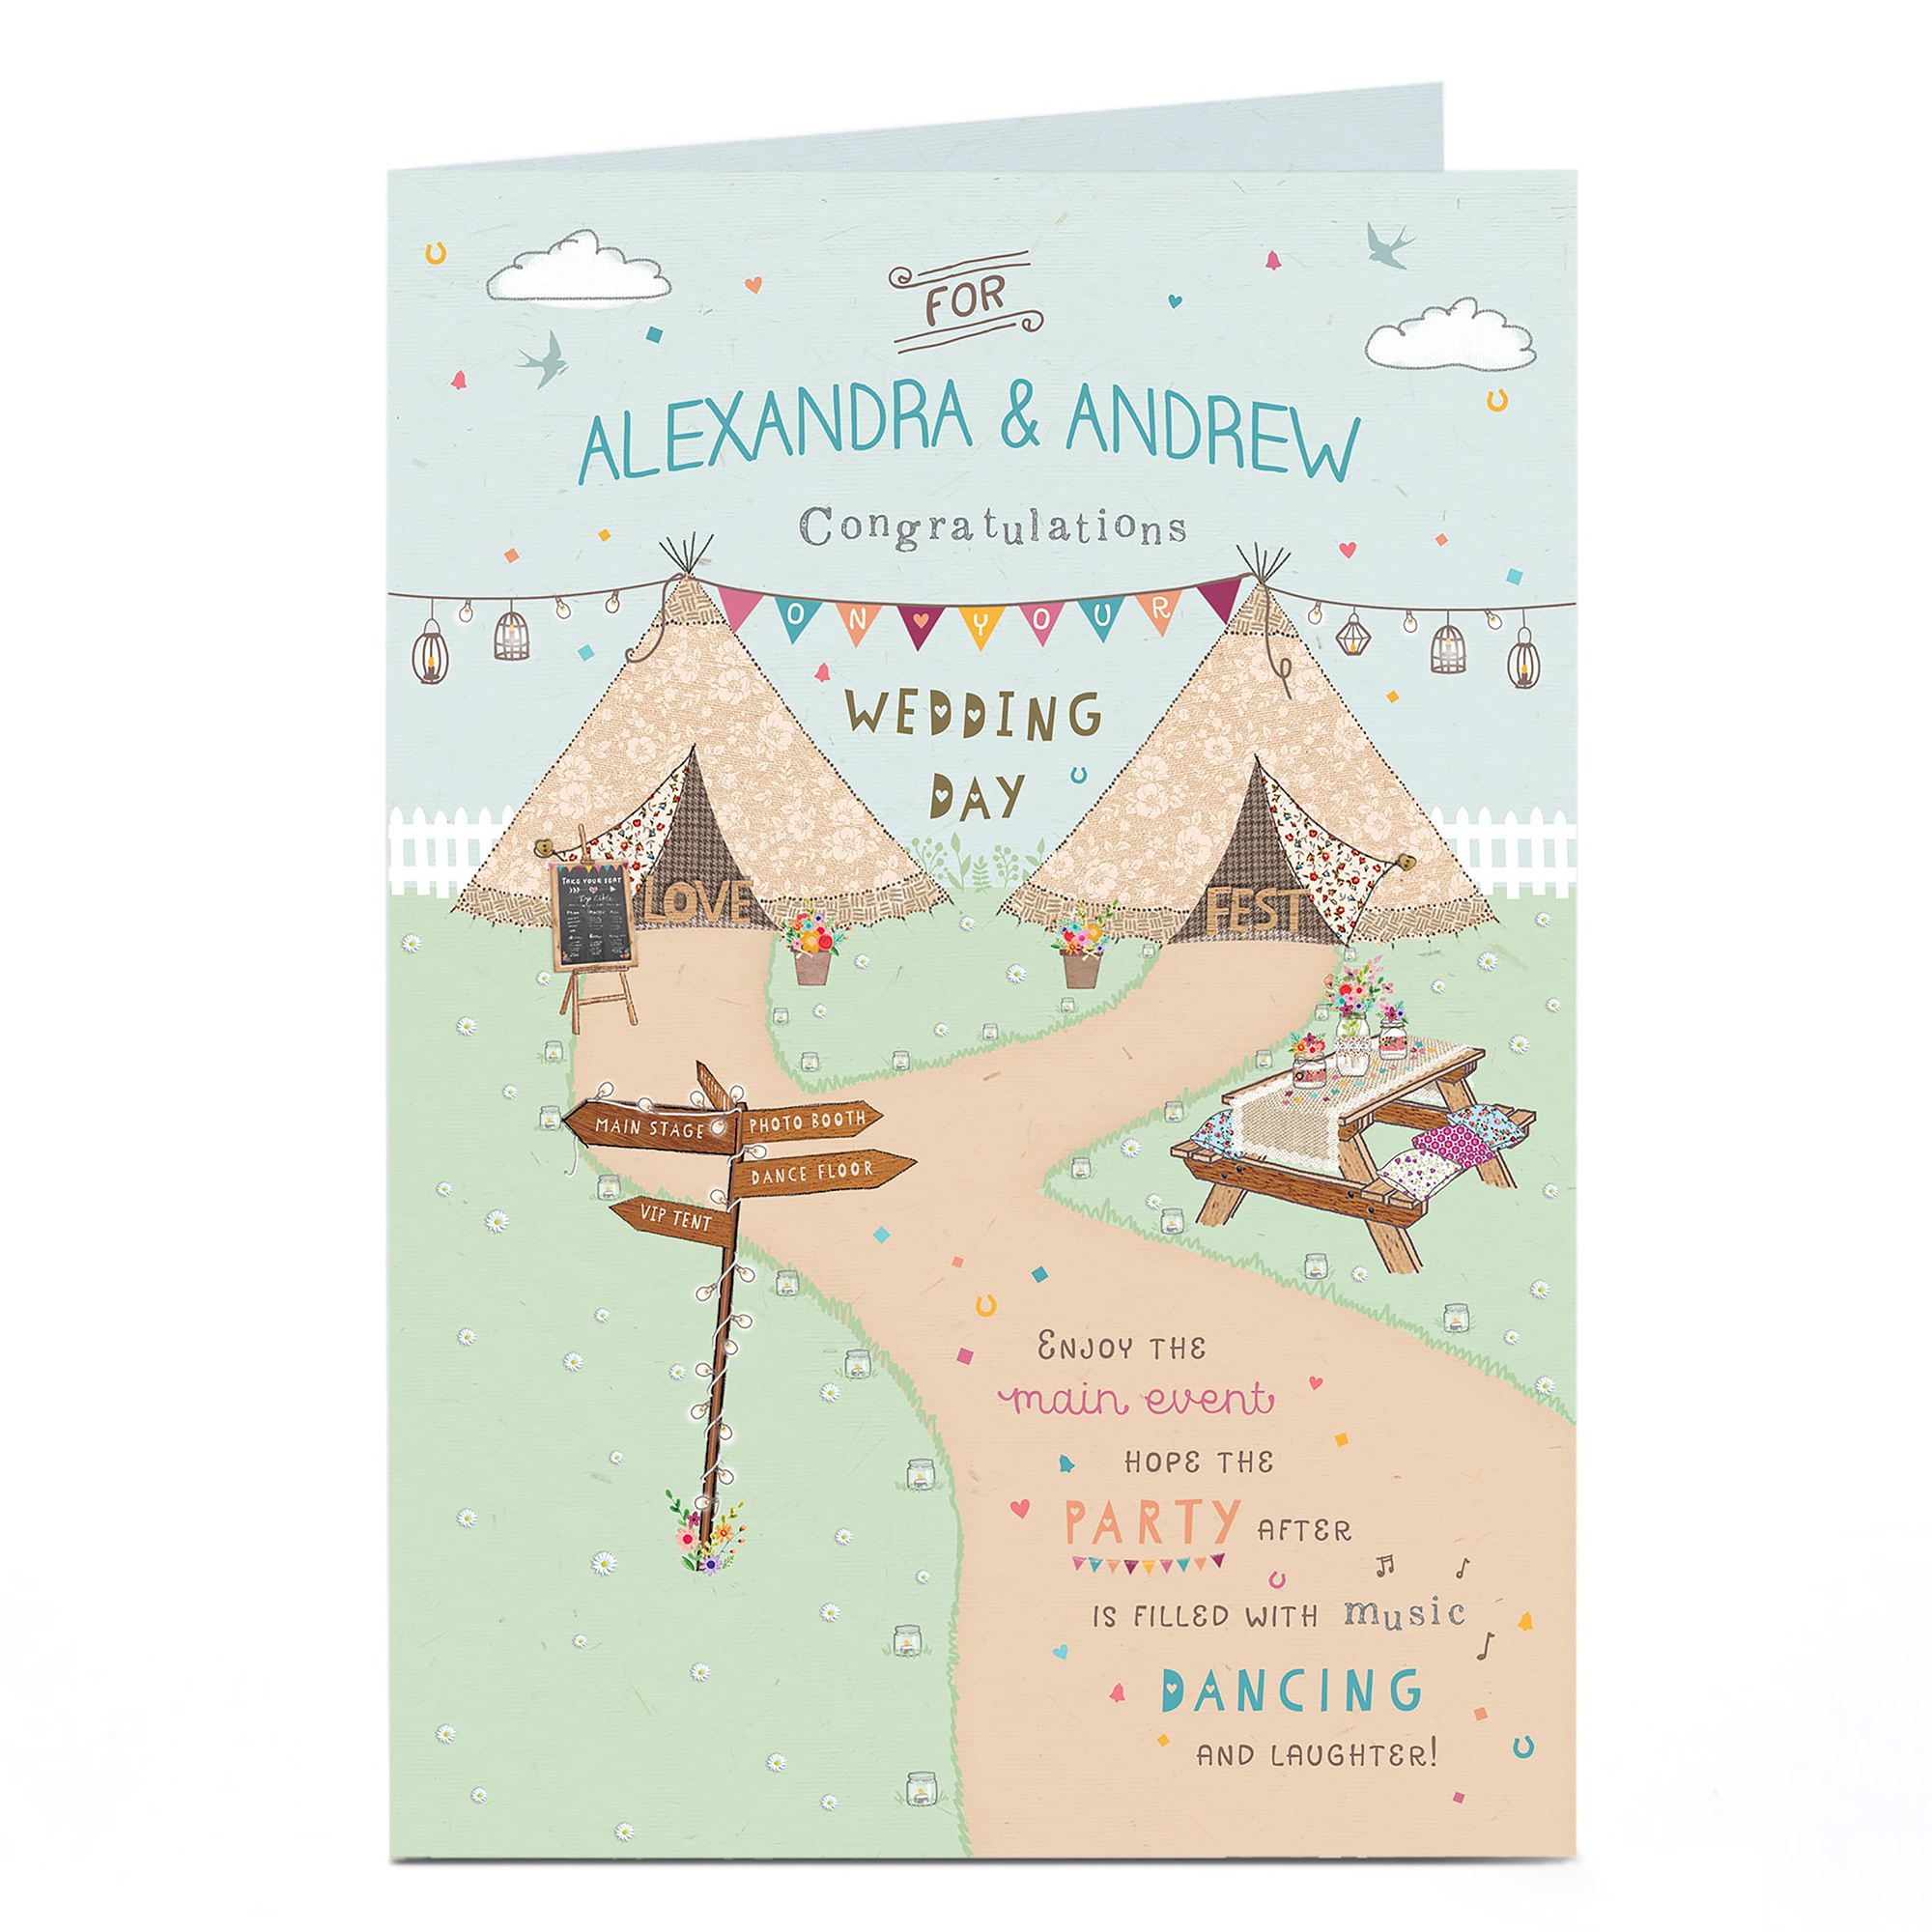 Personalised Wedding Card - Tipi Tents and Parties!